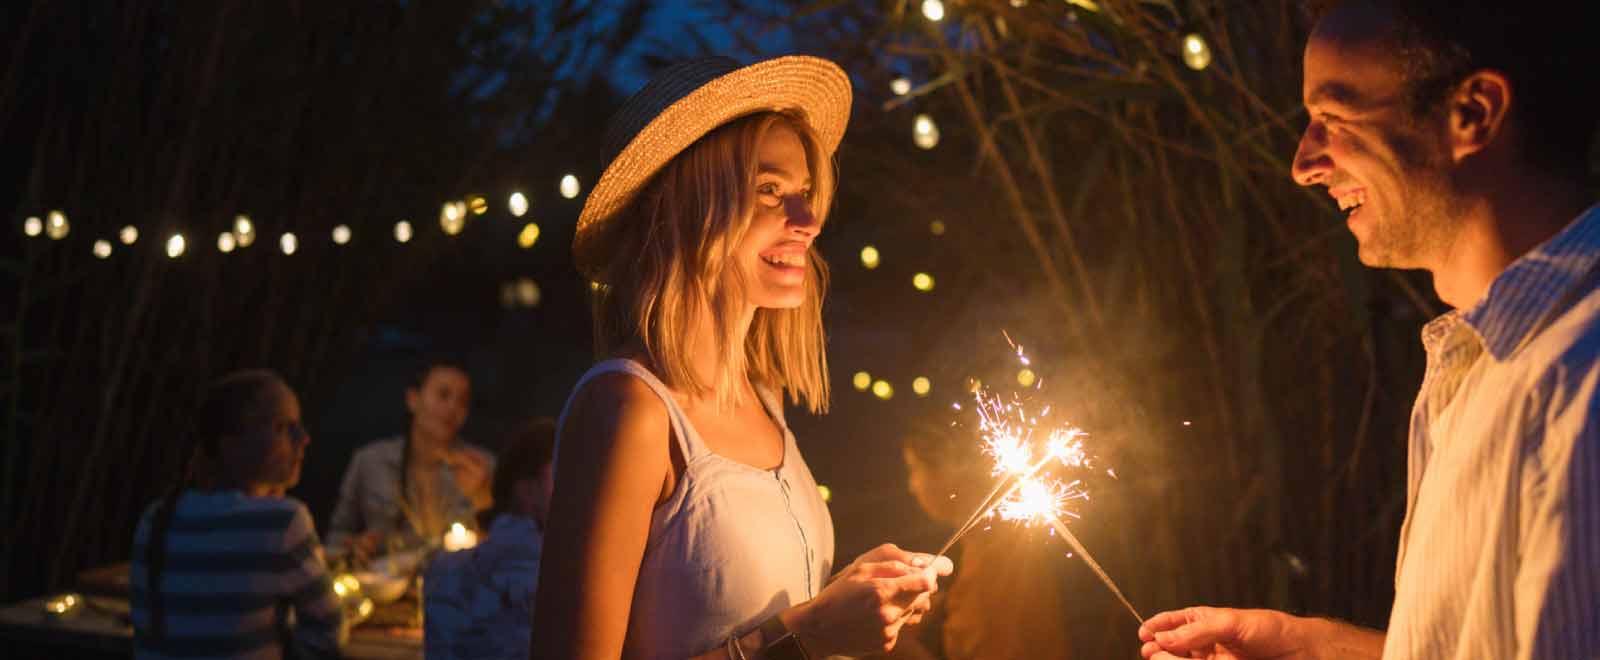 A couple enjoys a summer evening with sparklers, highlighting the joy and fun possible with smart summer savings.